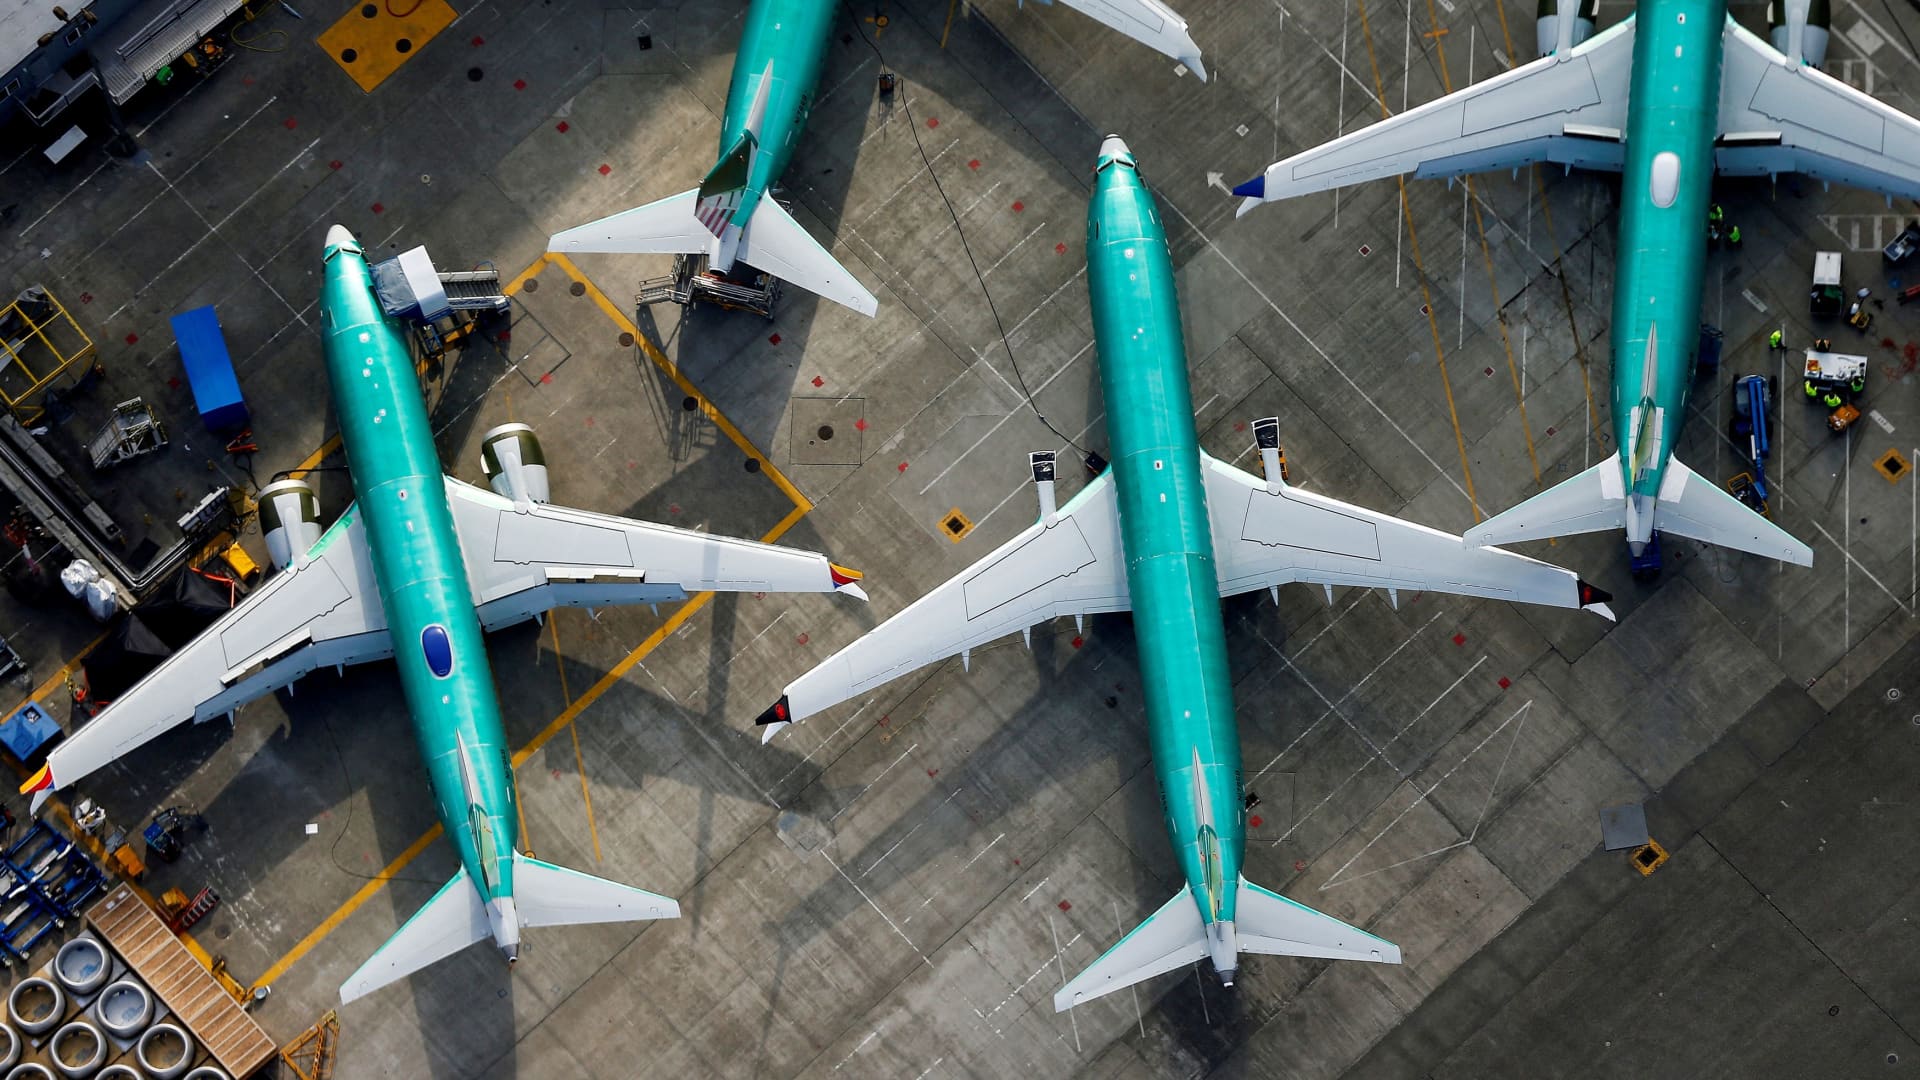 FAA gives Boeing 90 days to establish quality control plan